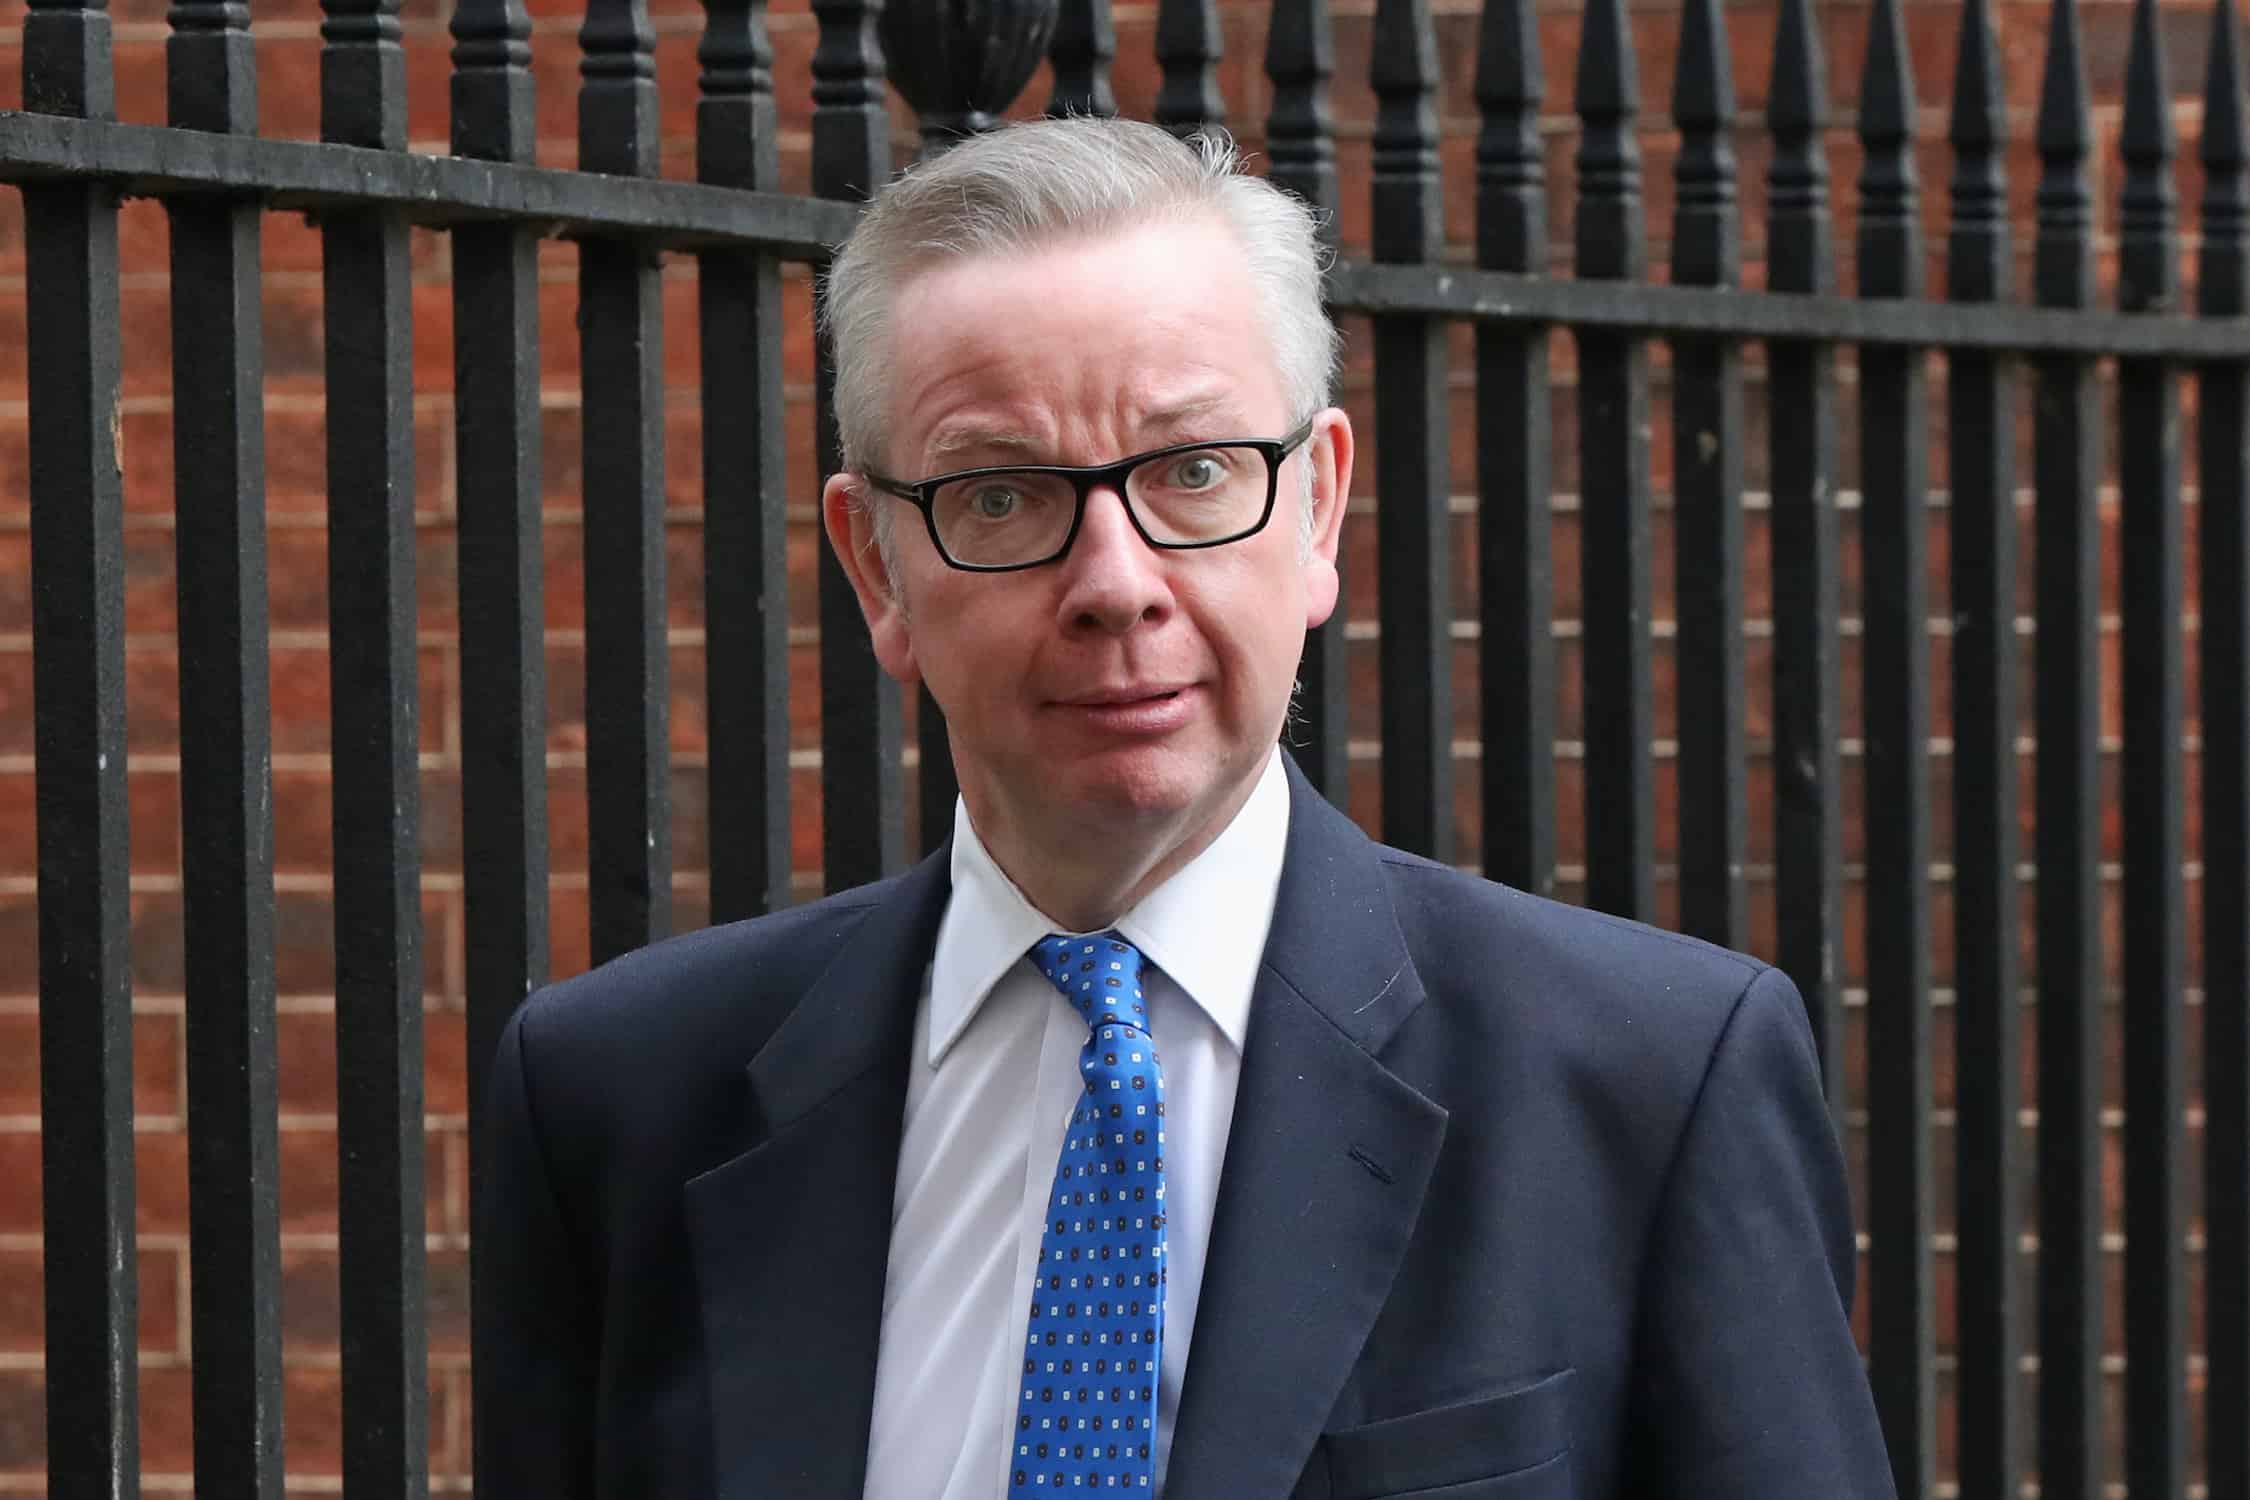 Labour accuses Gove of lying over vetting of dodgy PPE deals